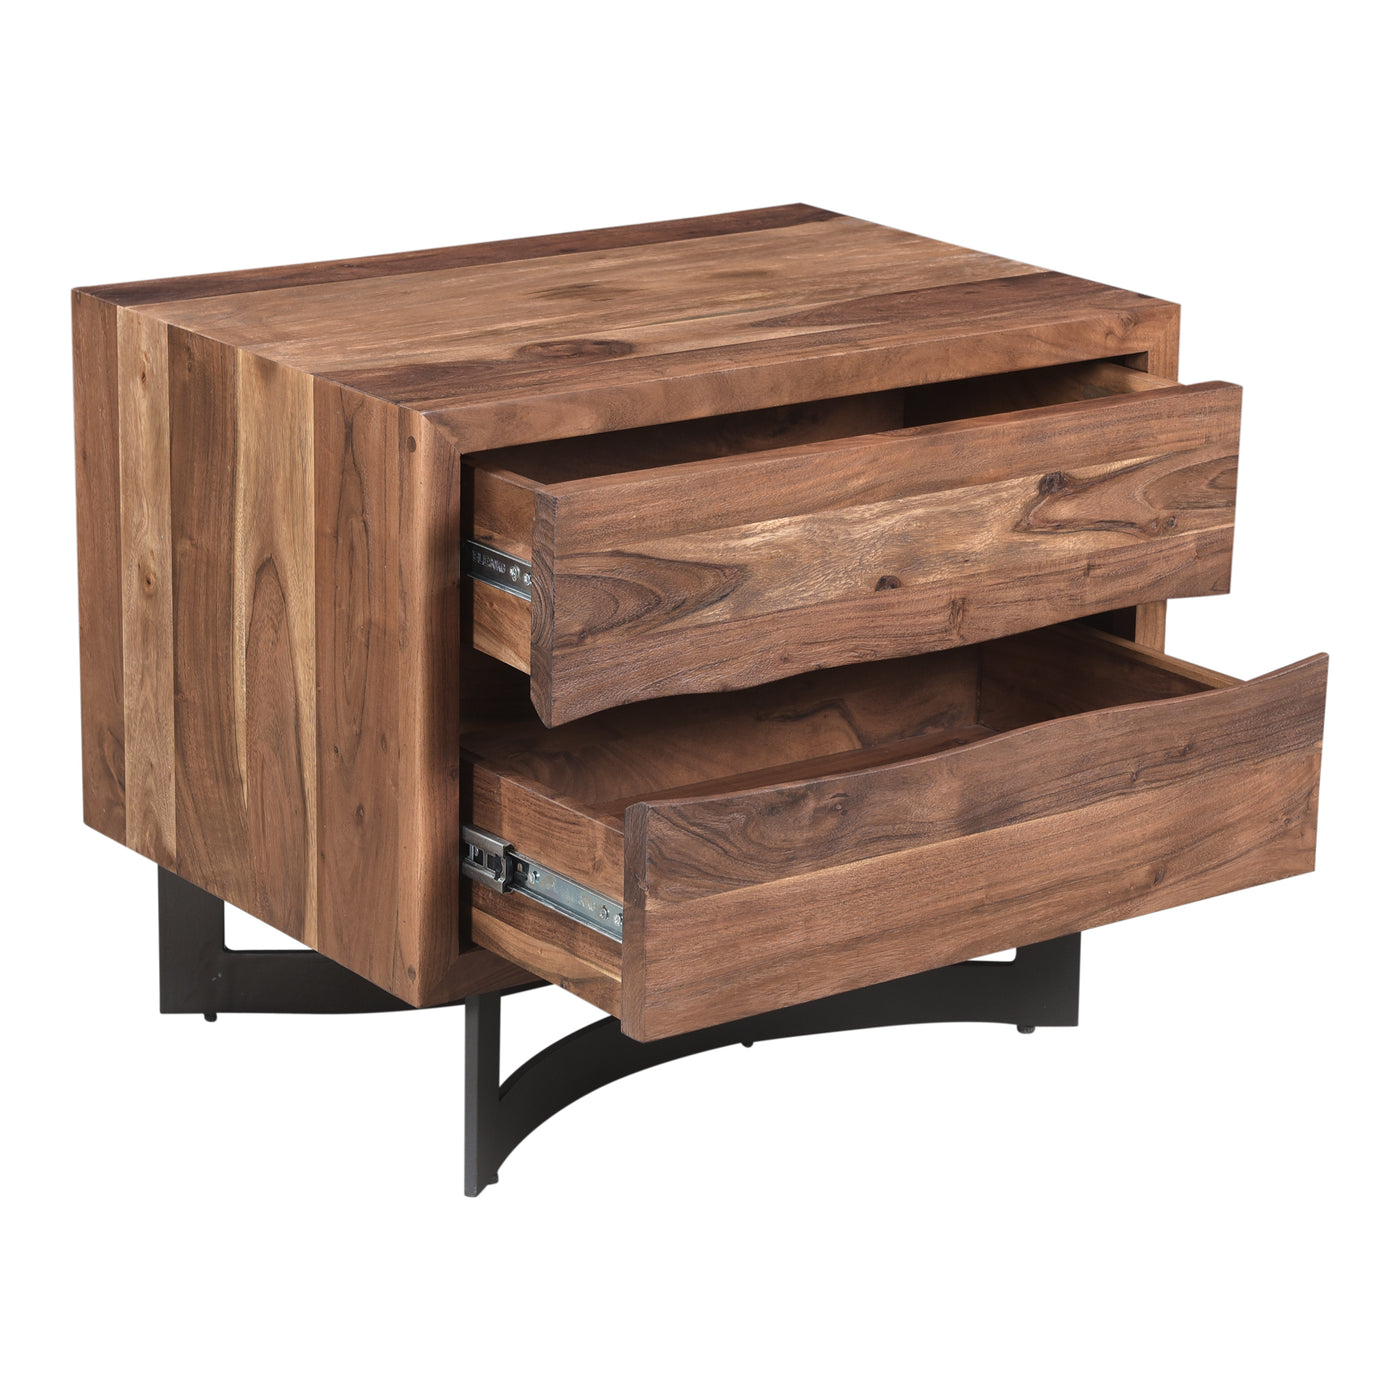 The Bent collection puts nature’s craft front and center. Made of beautiful solid acacia wood, rustic live edge detailing ...